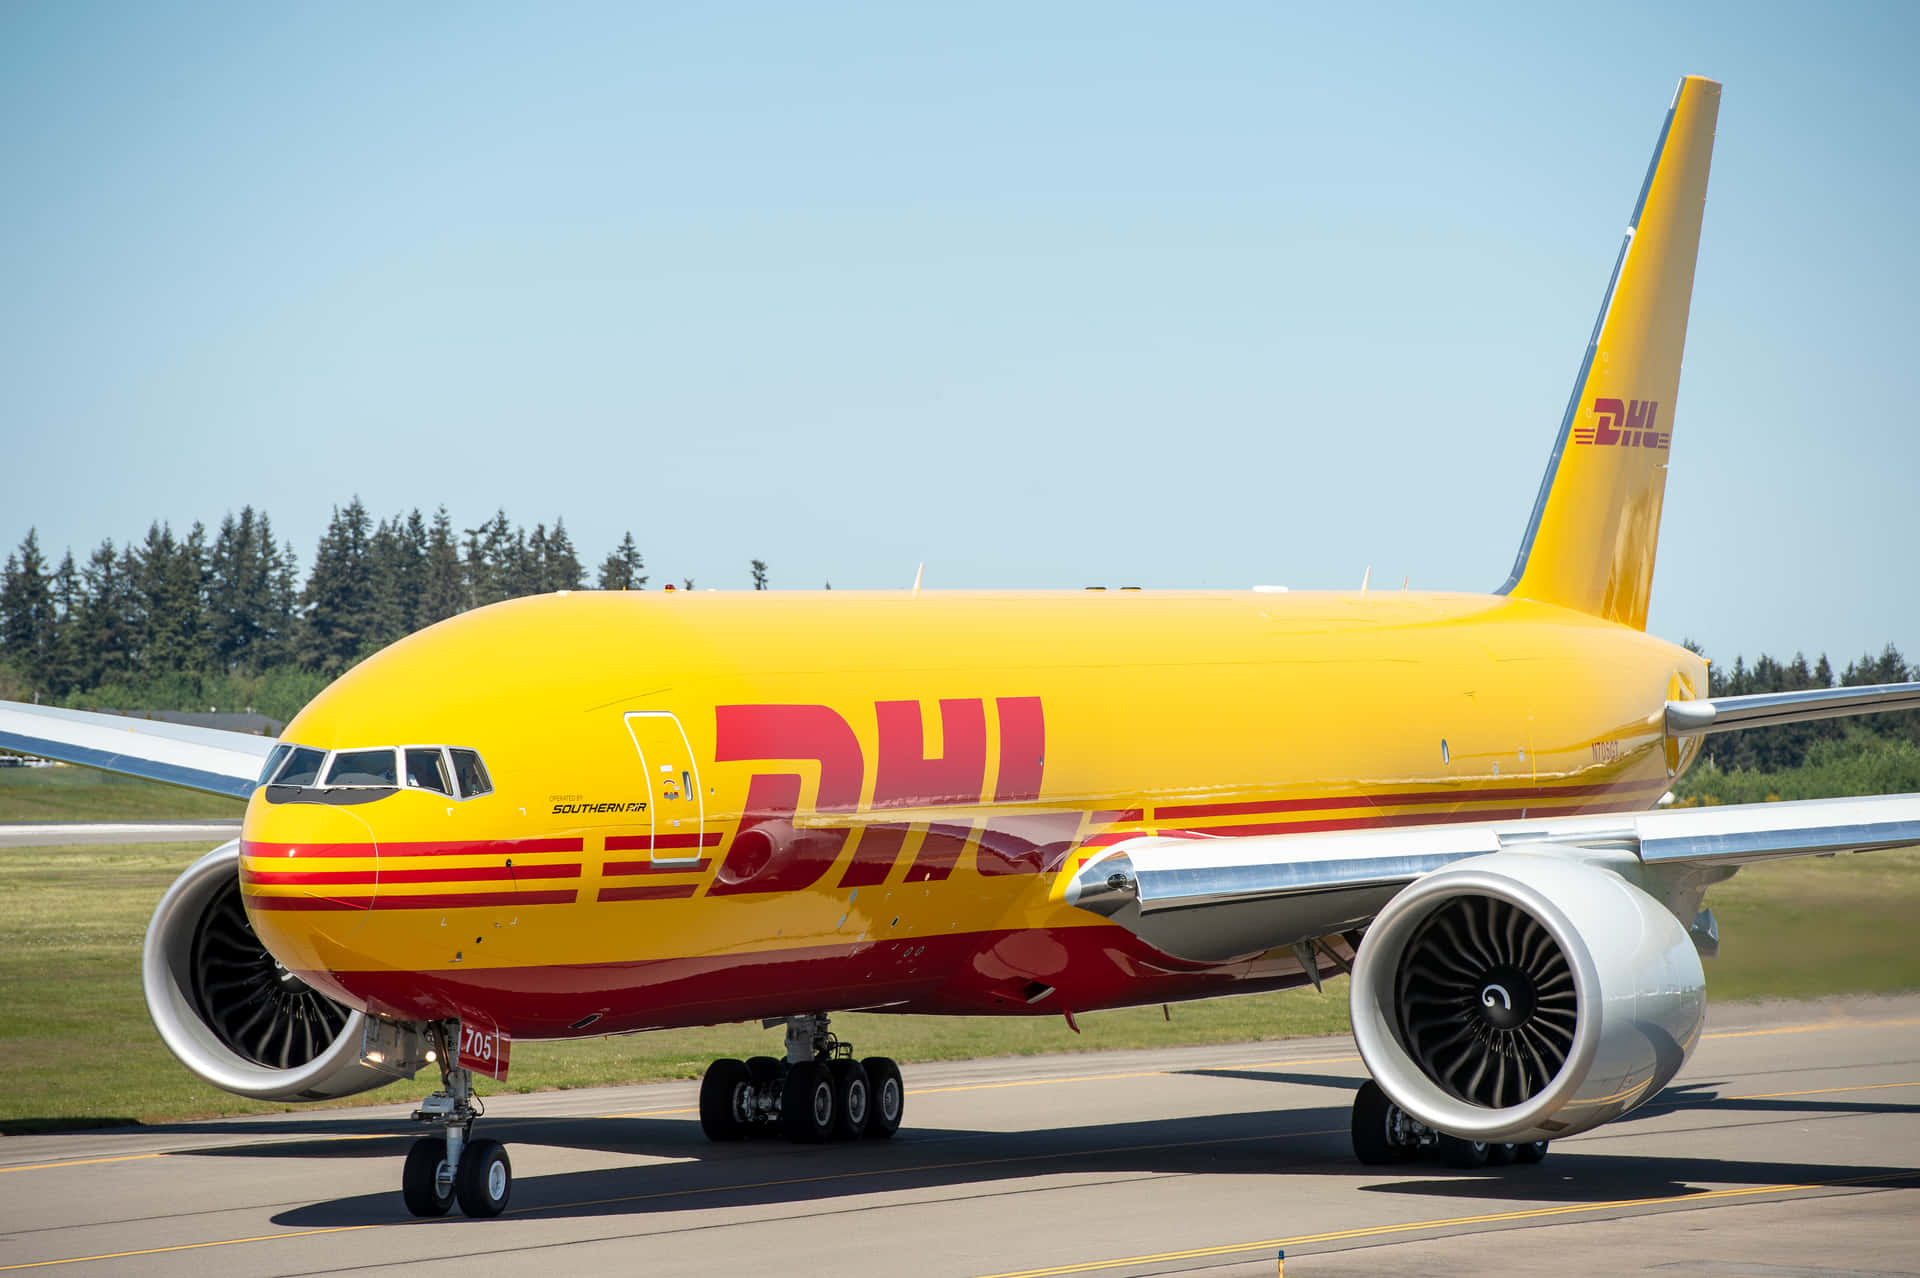 "Delivering Global Solutions with DHL"